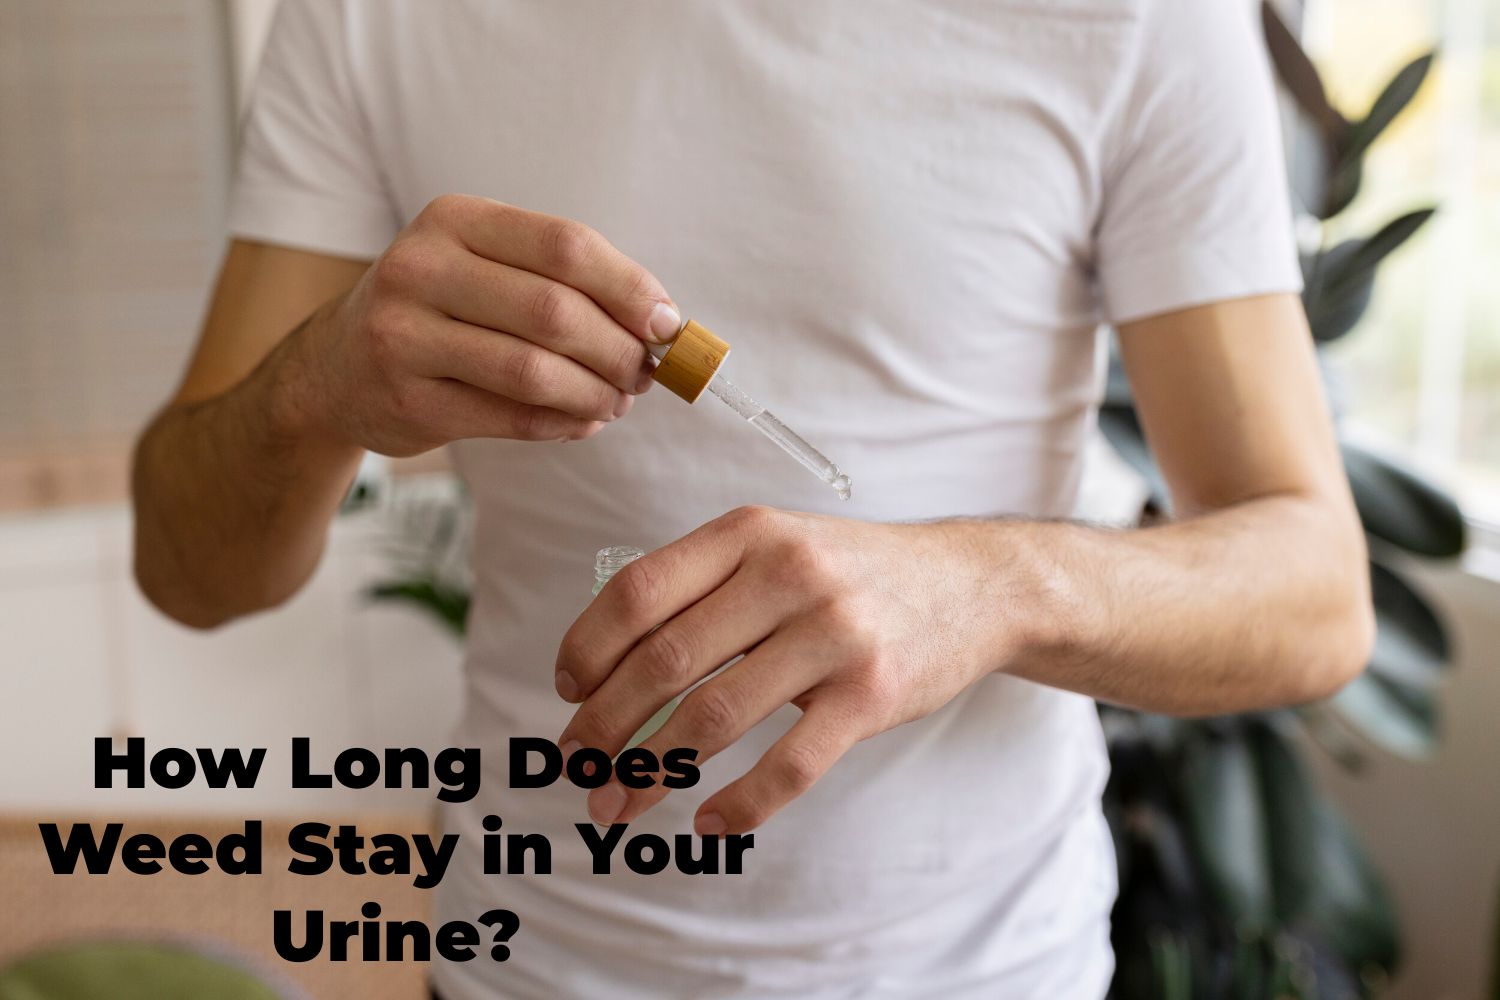 How Long Does Weed Stay in Your Urine